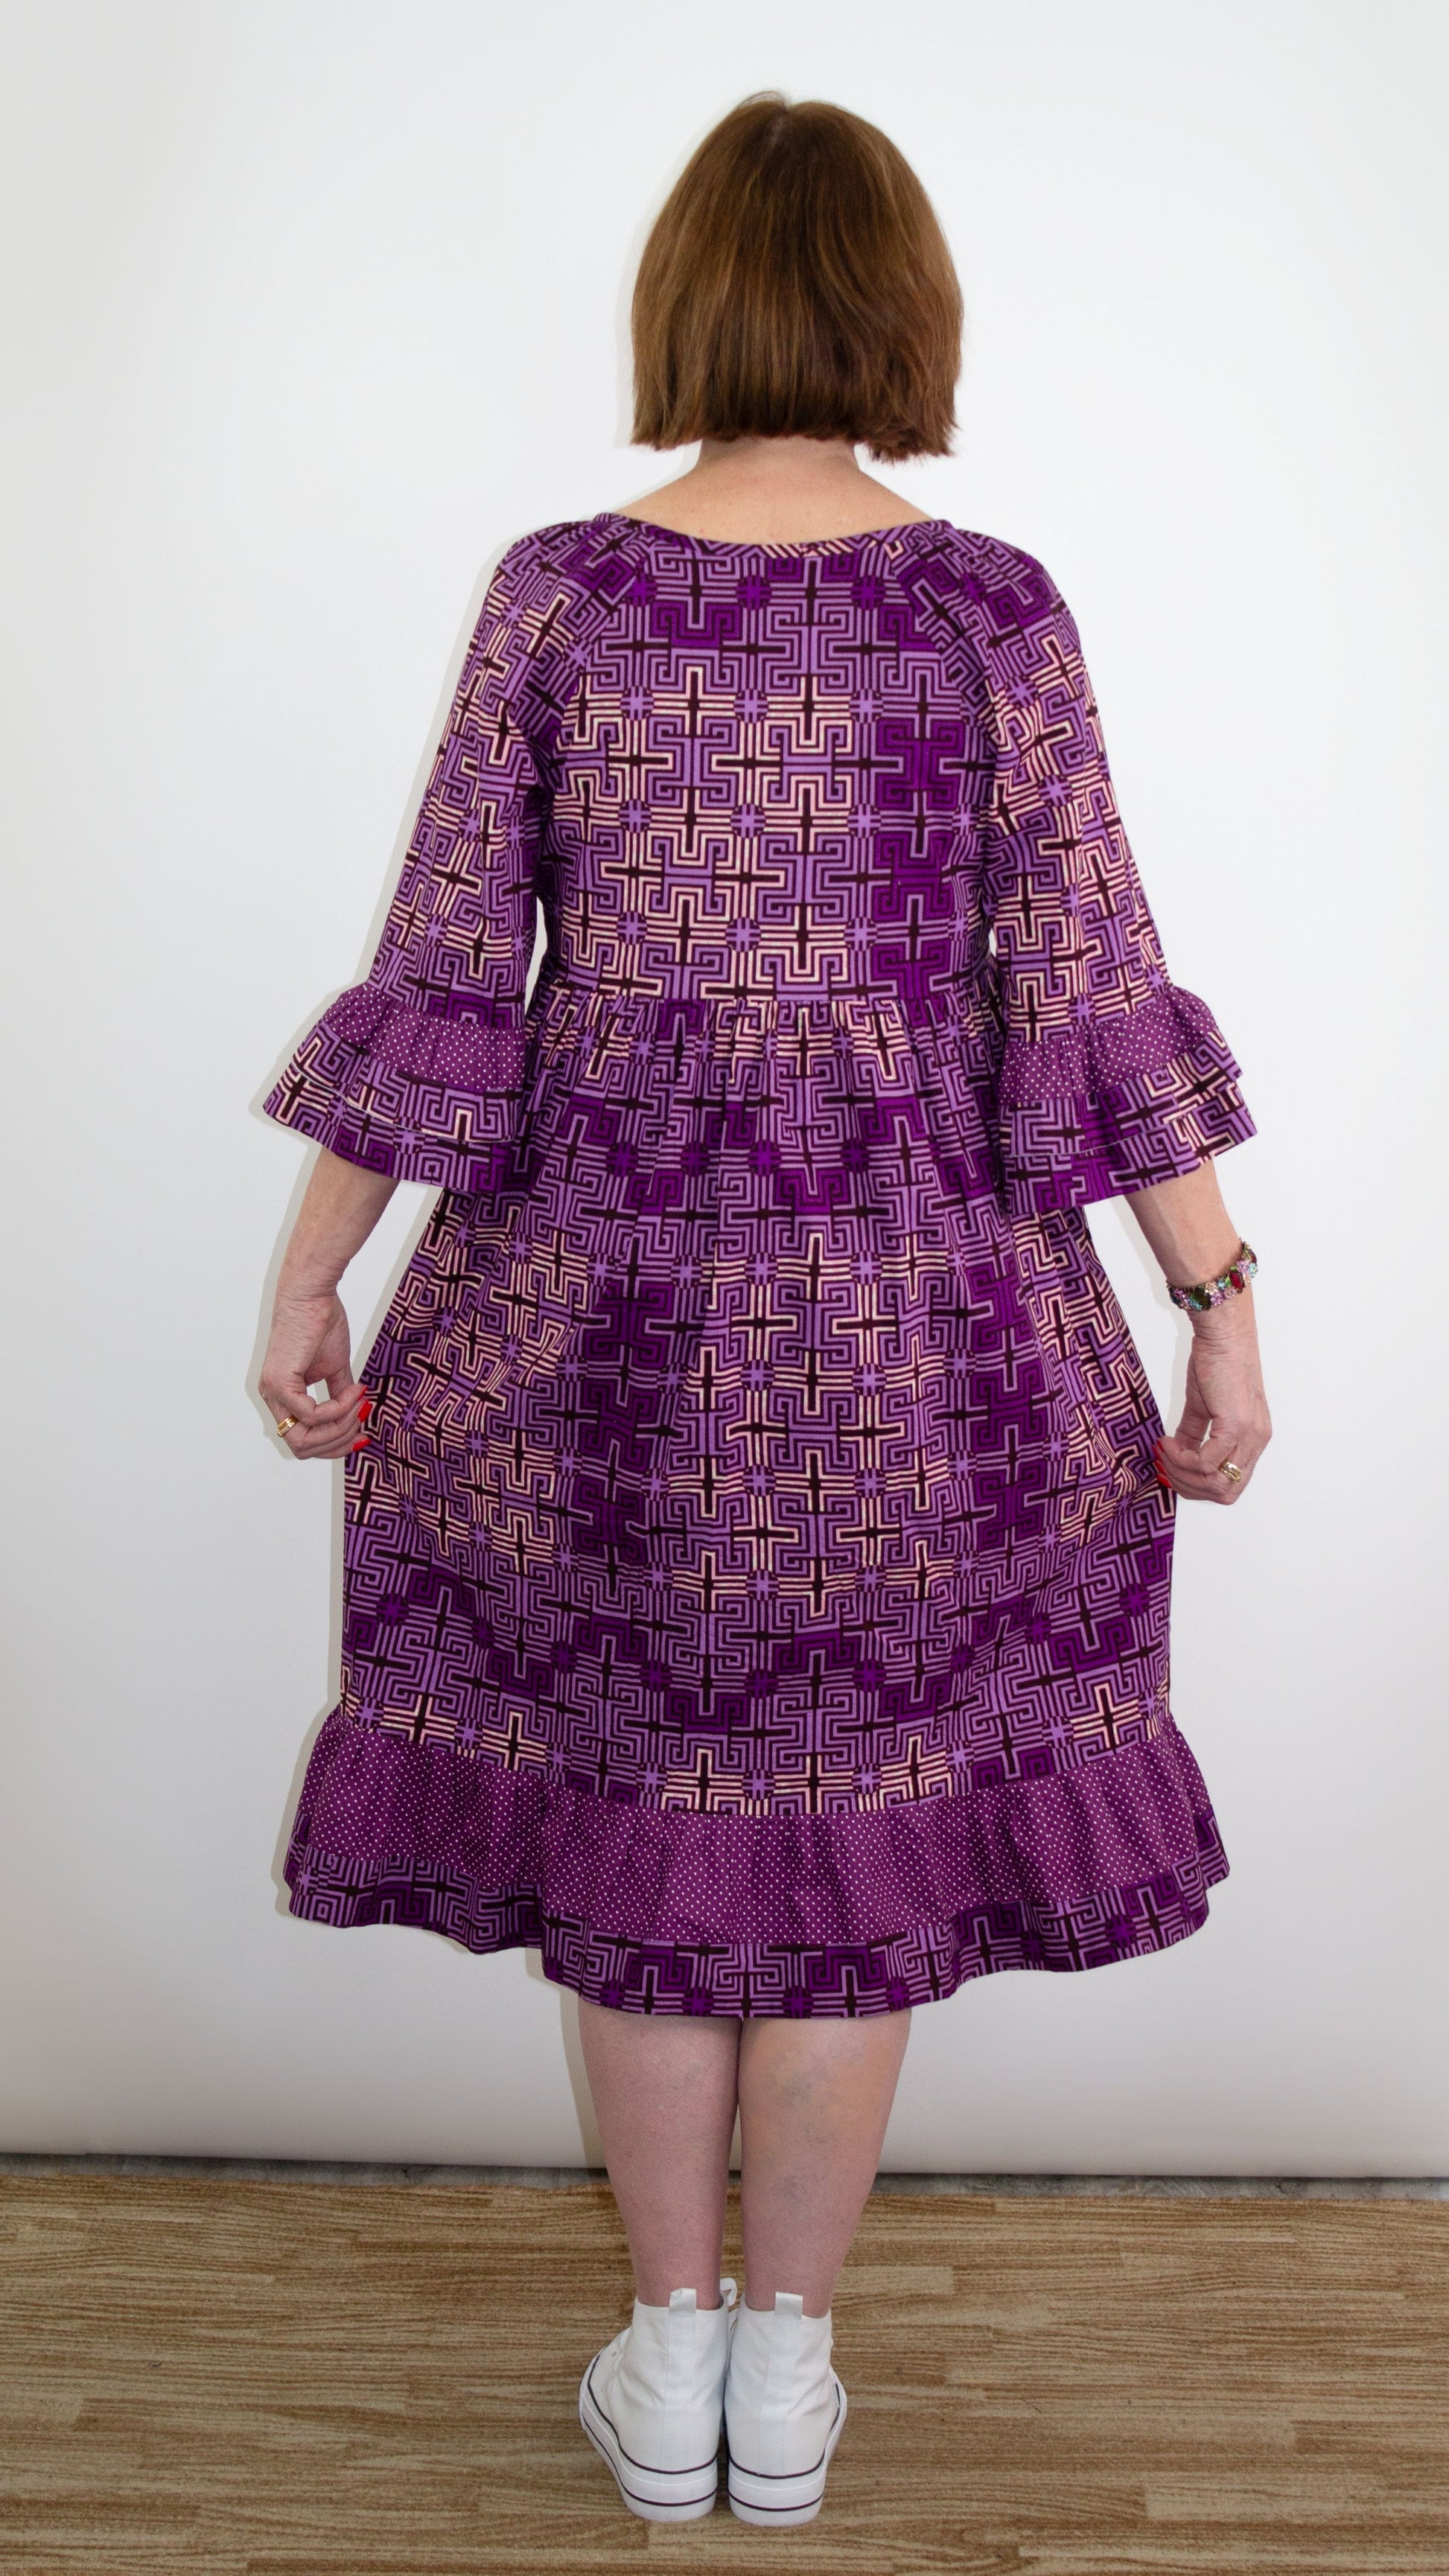 A back view capturing the elegance of a purple ruffle dress featuring a charming ruffle design at the bottom and elbow-length sleeves and playful designs.